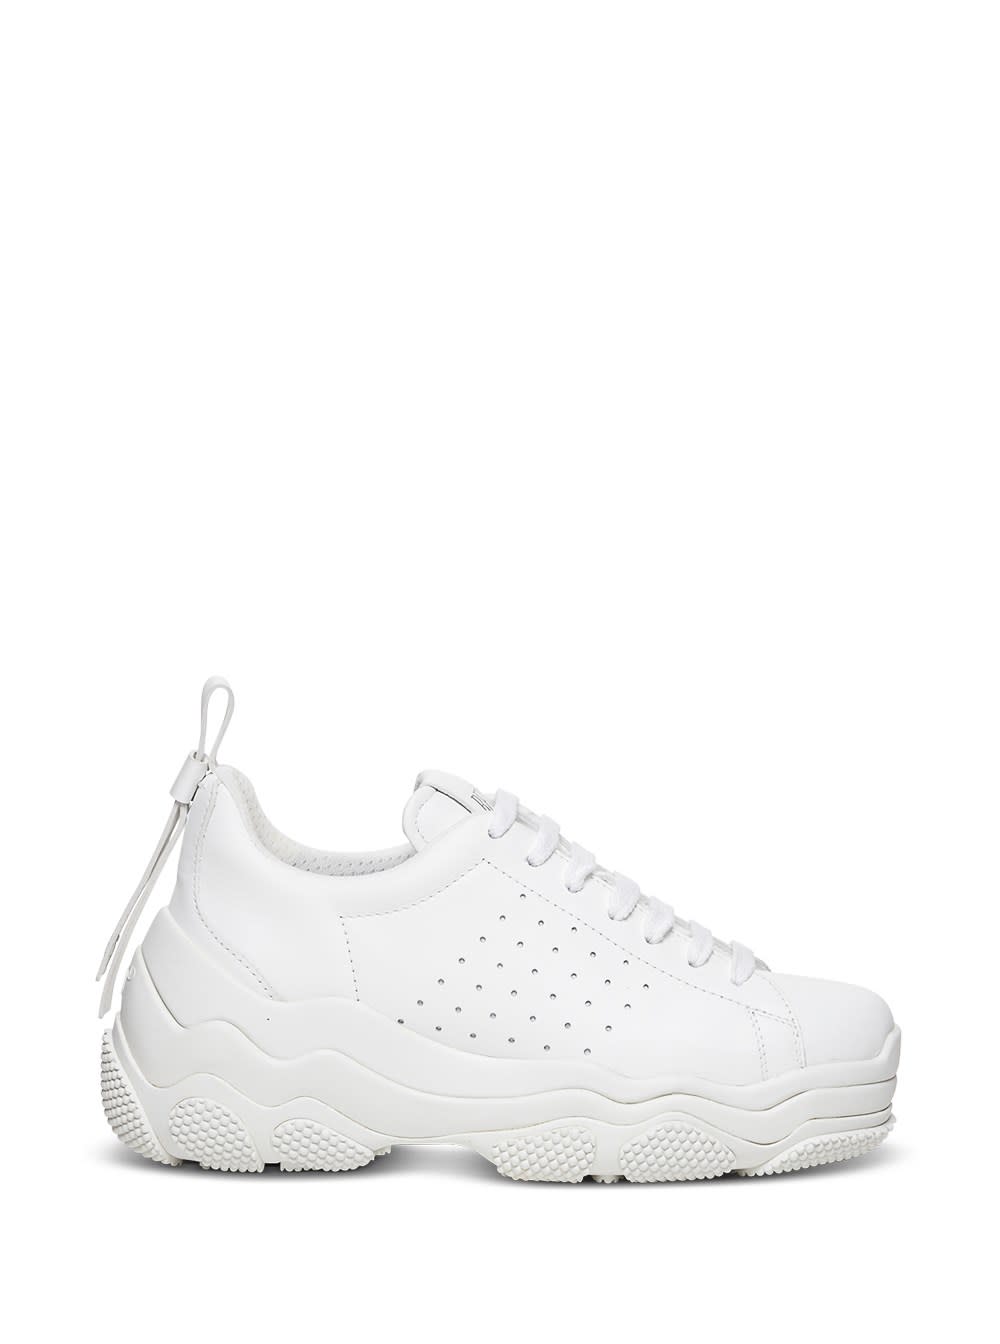 Buy RED Valentino Low Top Sneakers In White Leather And Bow online, shop RED Valentino shoes with free shipping